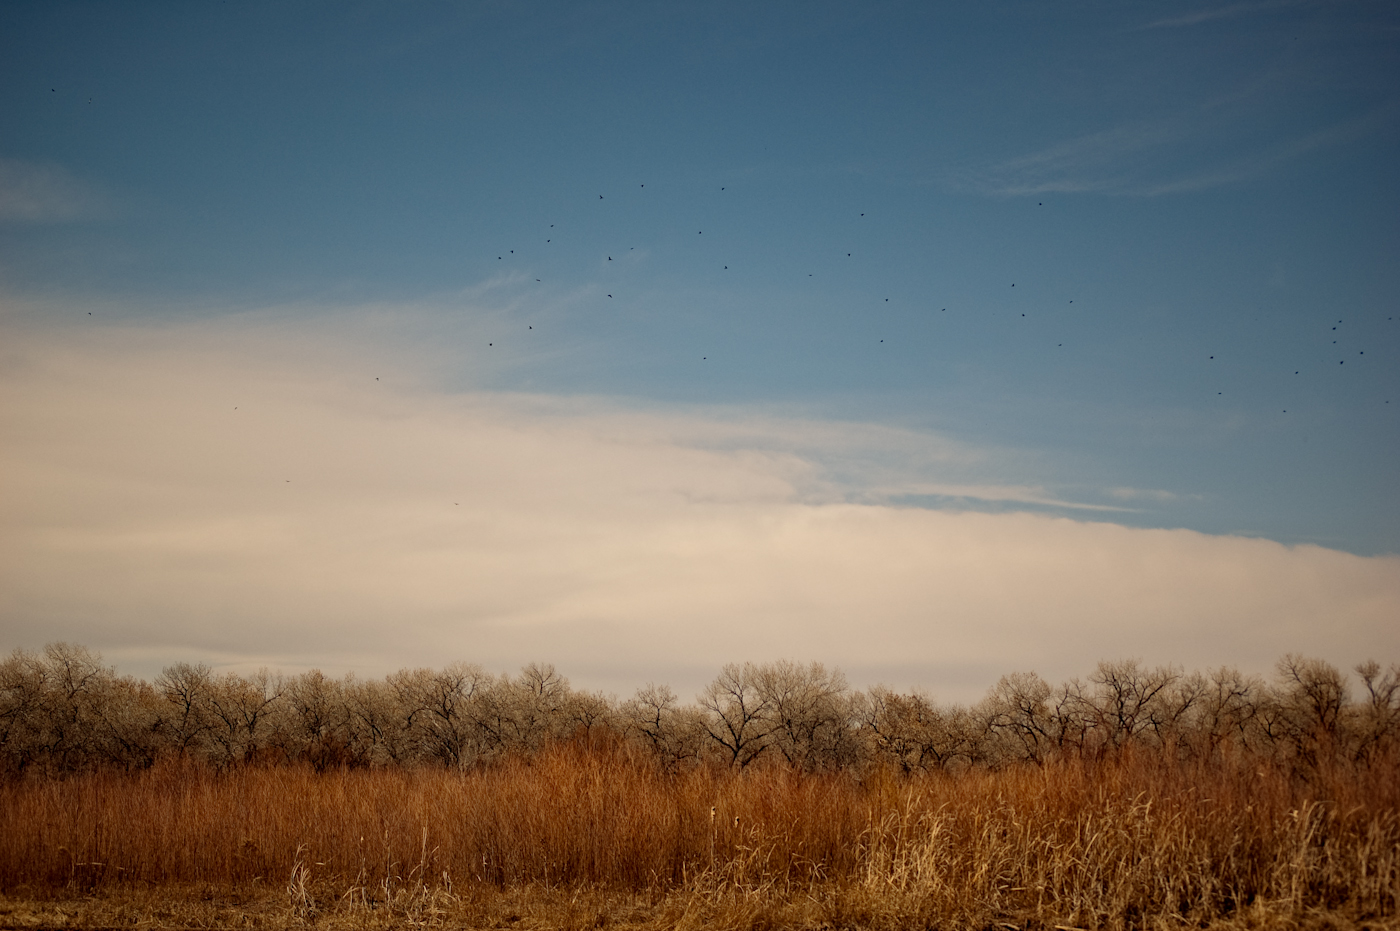 a field with trees and some birds flying in the sky